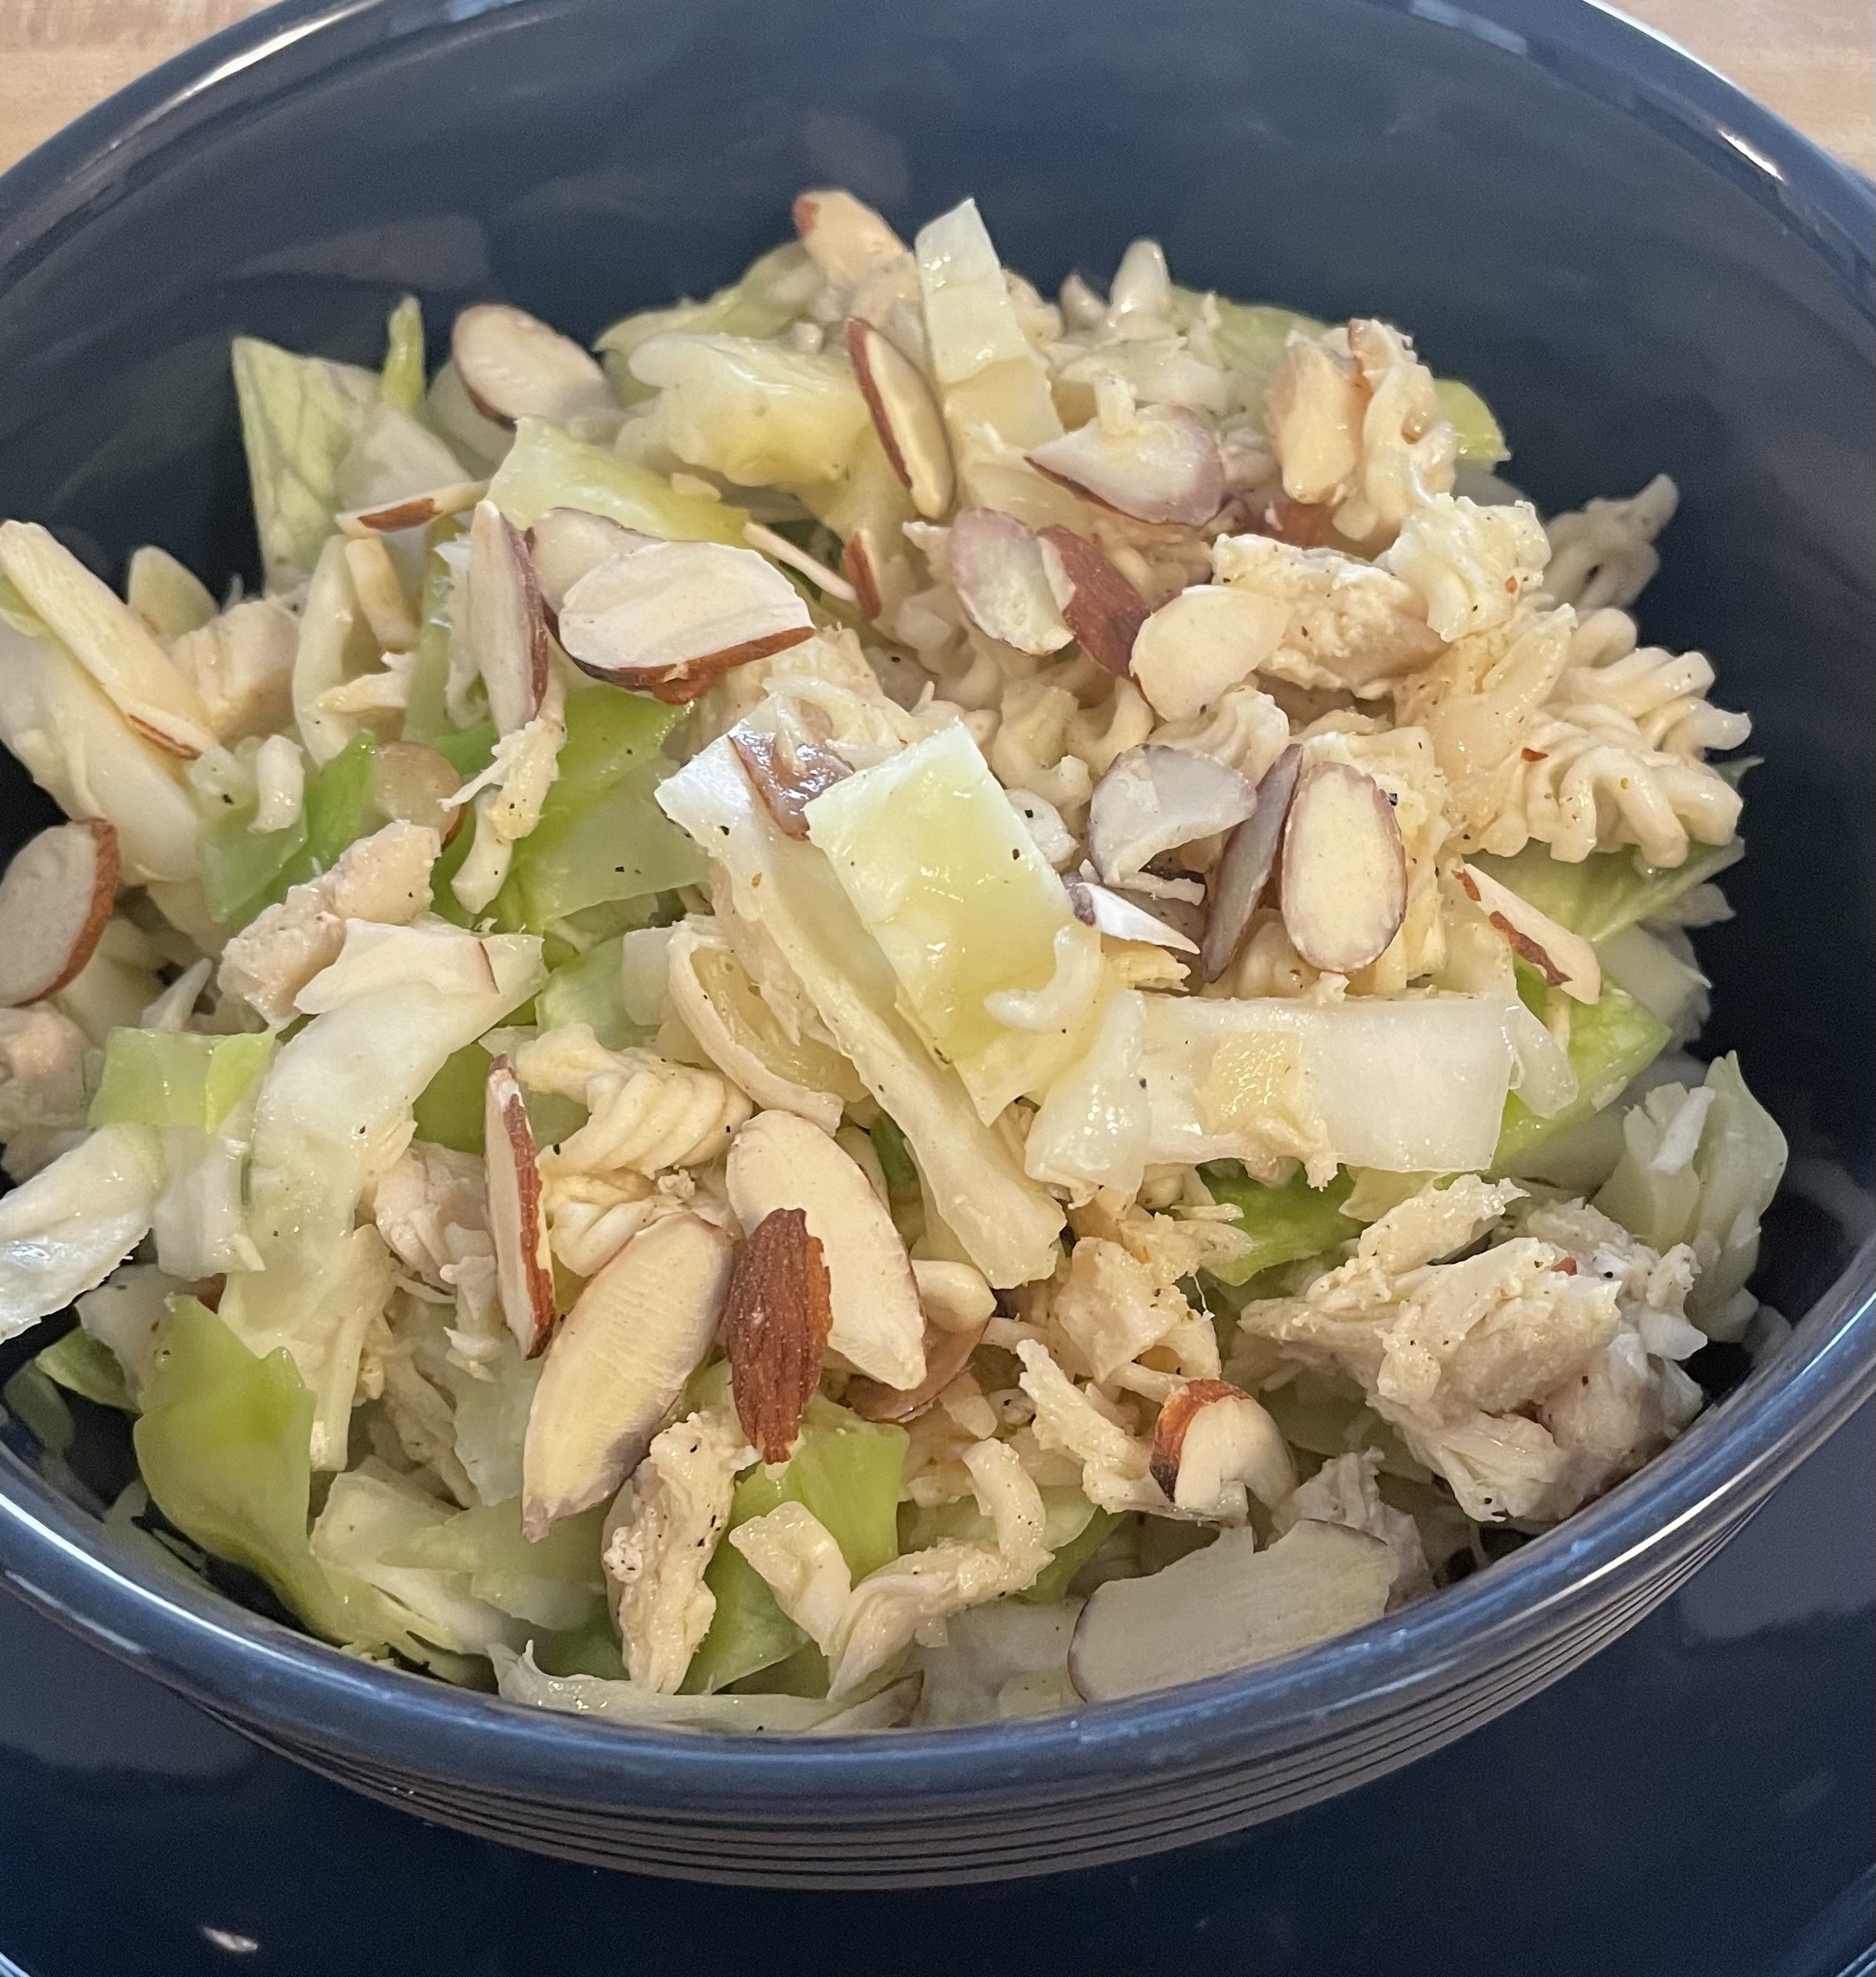 A Cabbage Chicken Salad Recipe You Need to Try